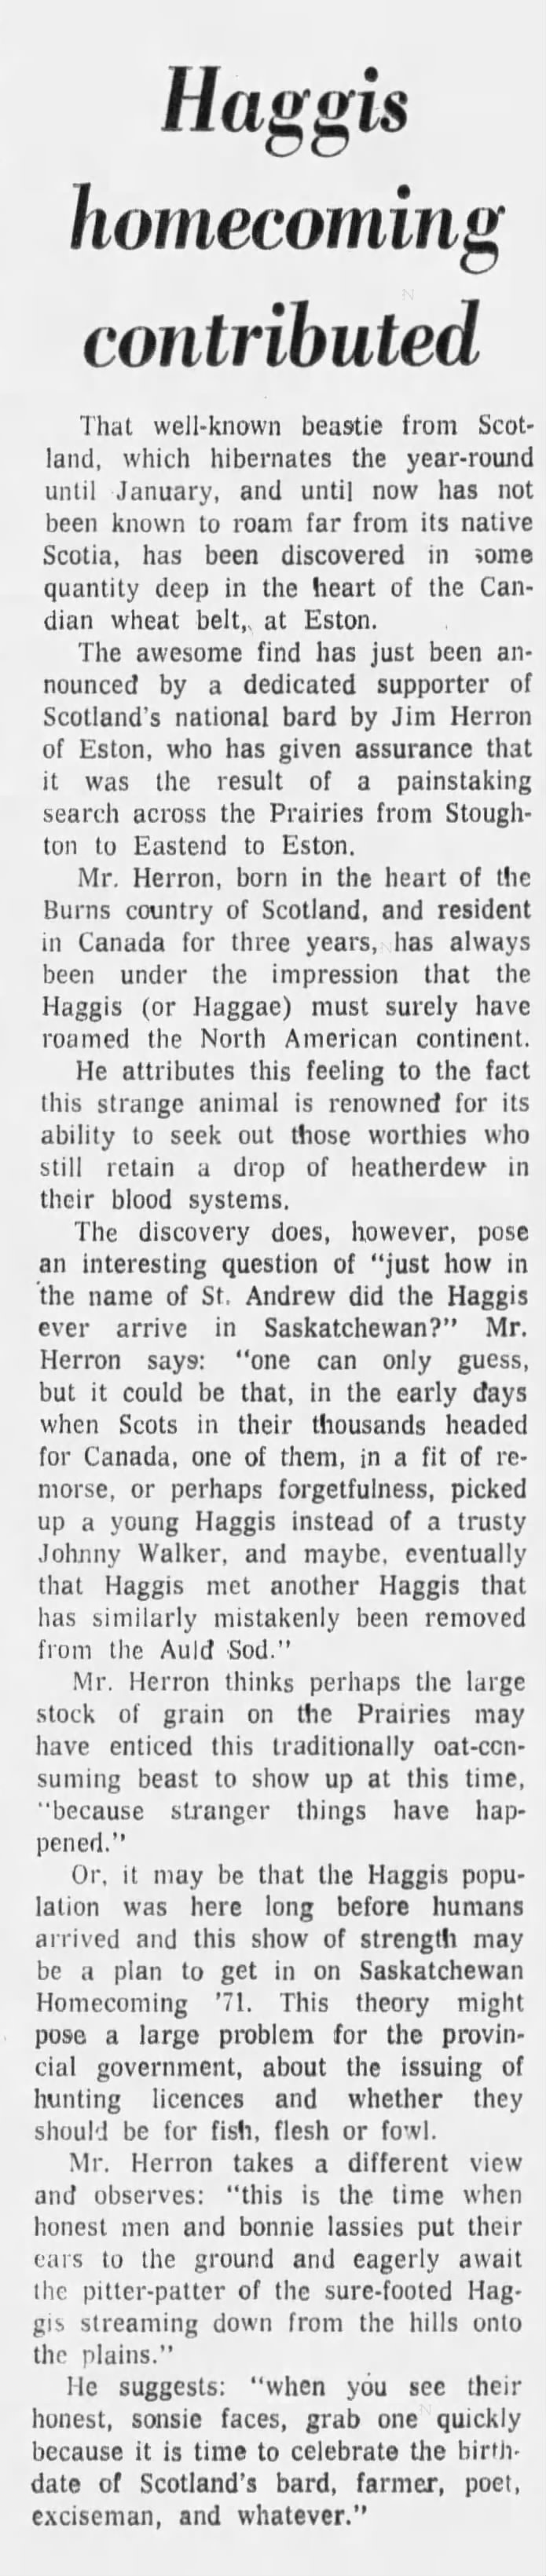 1971-01-23 Haggis homecoming contributed